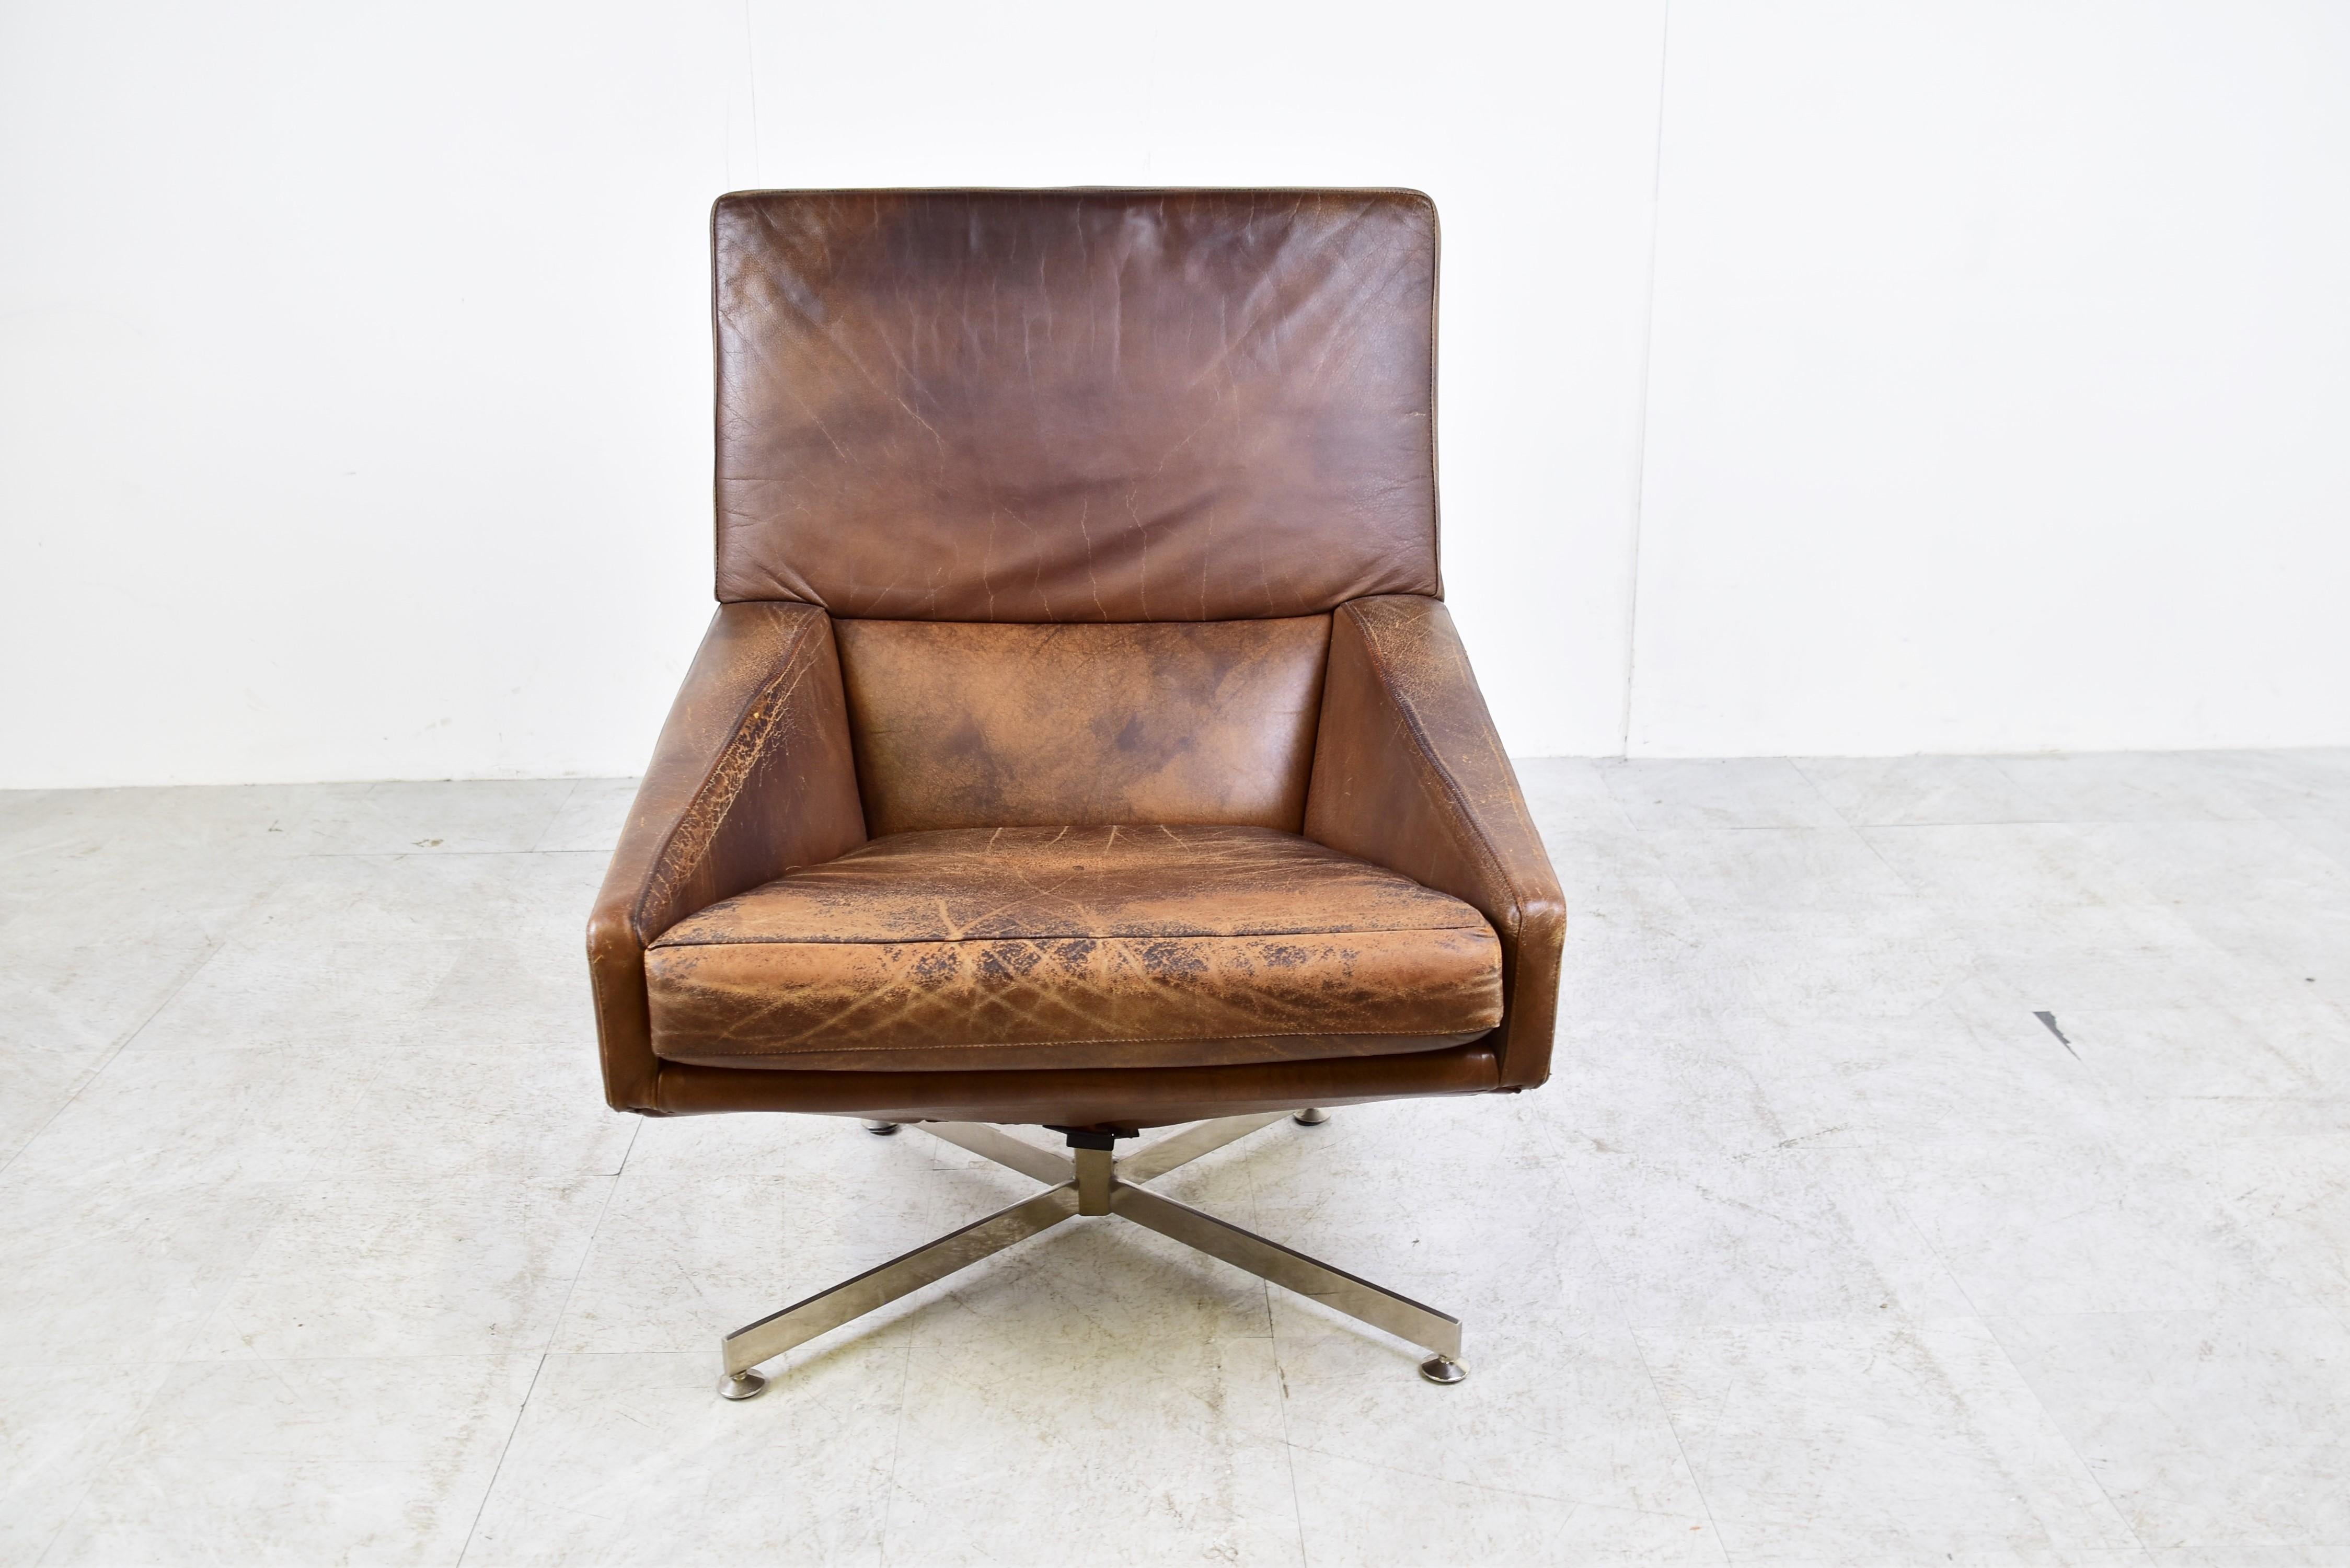 Attractive mid-century leather swivel chair by Belgian company Beaufort.

The chair has beautifully aged with attractive wear/patina.

Chromed steel base.

1960s - Belgian

Dimensions:
Height: 94cm/37.00